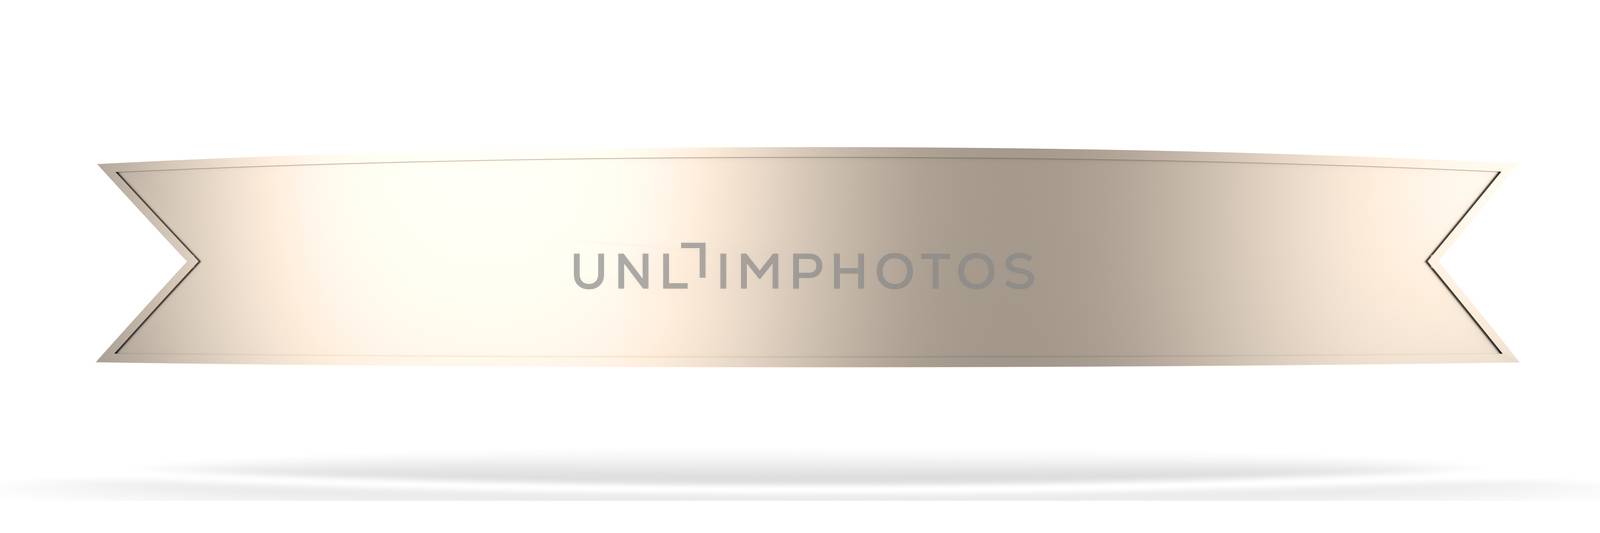 A antique banner. 3D rendered illustration. Isolated on white.